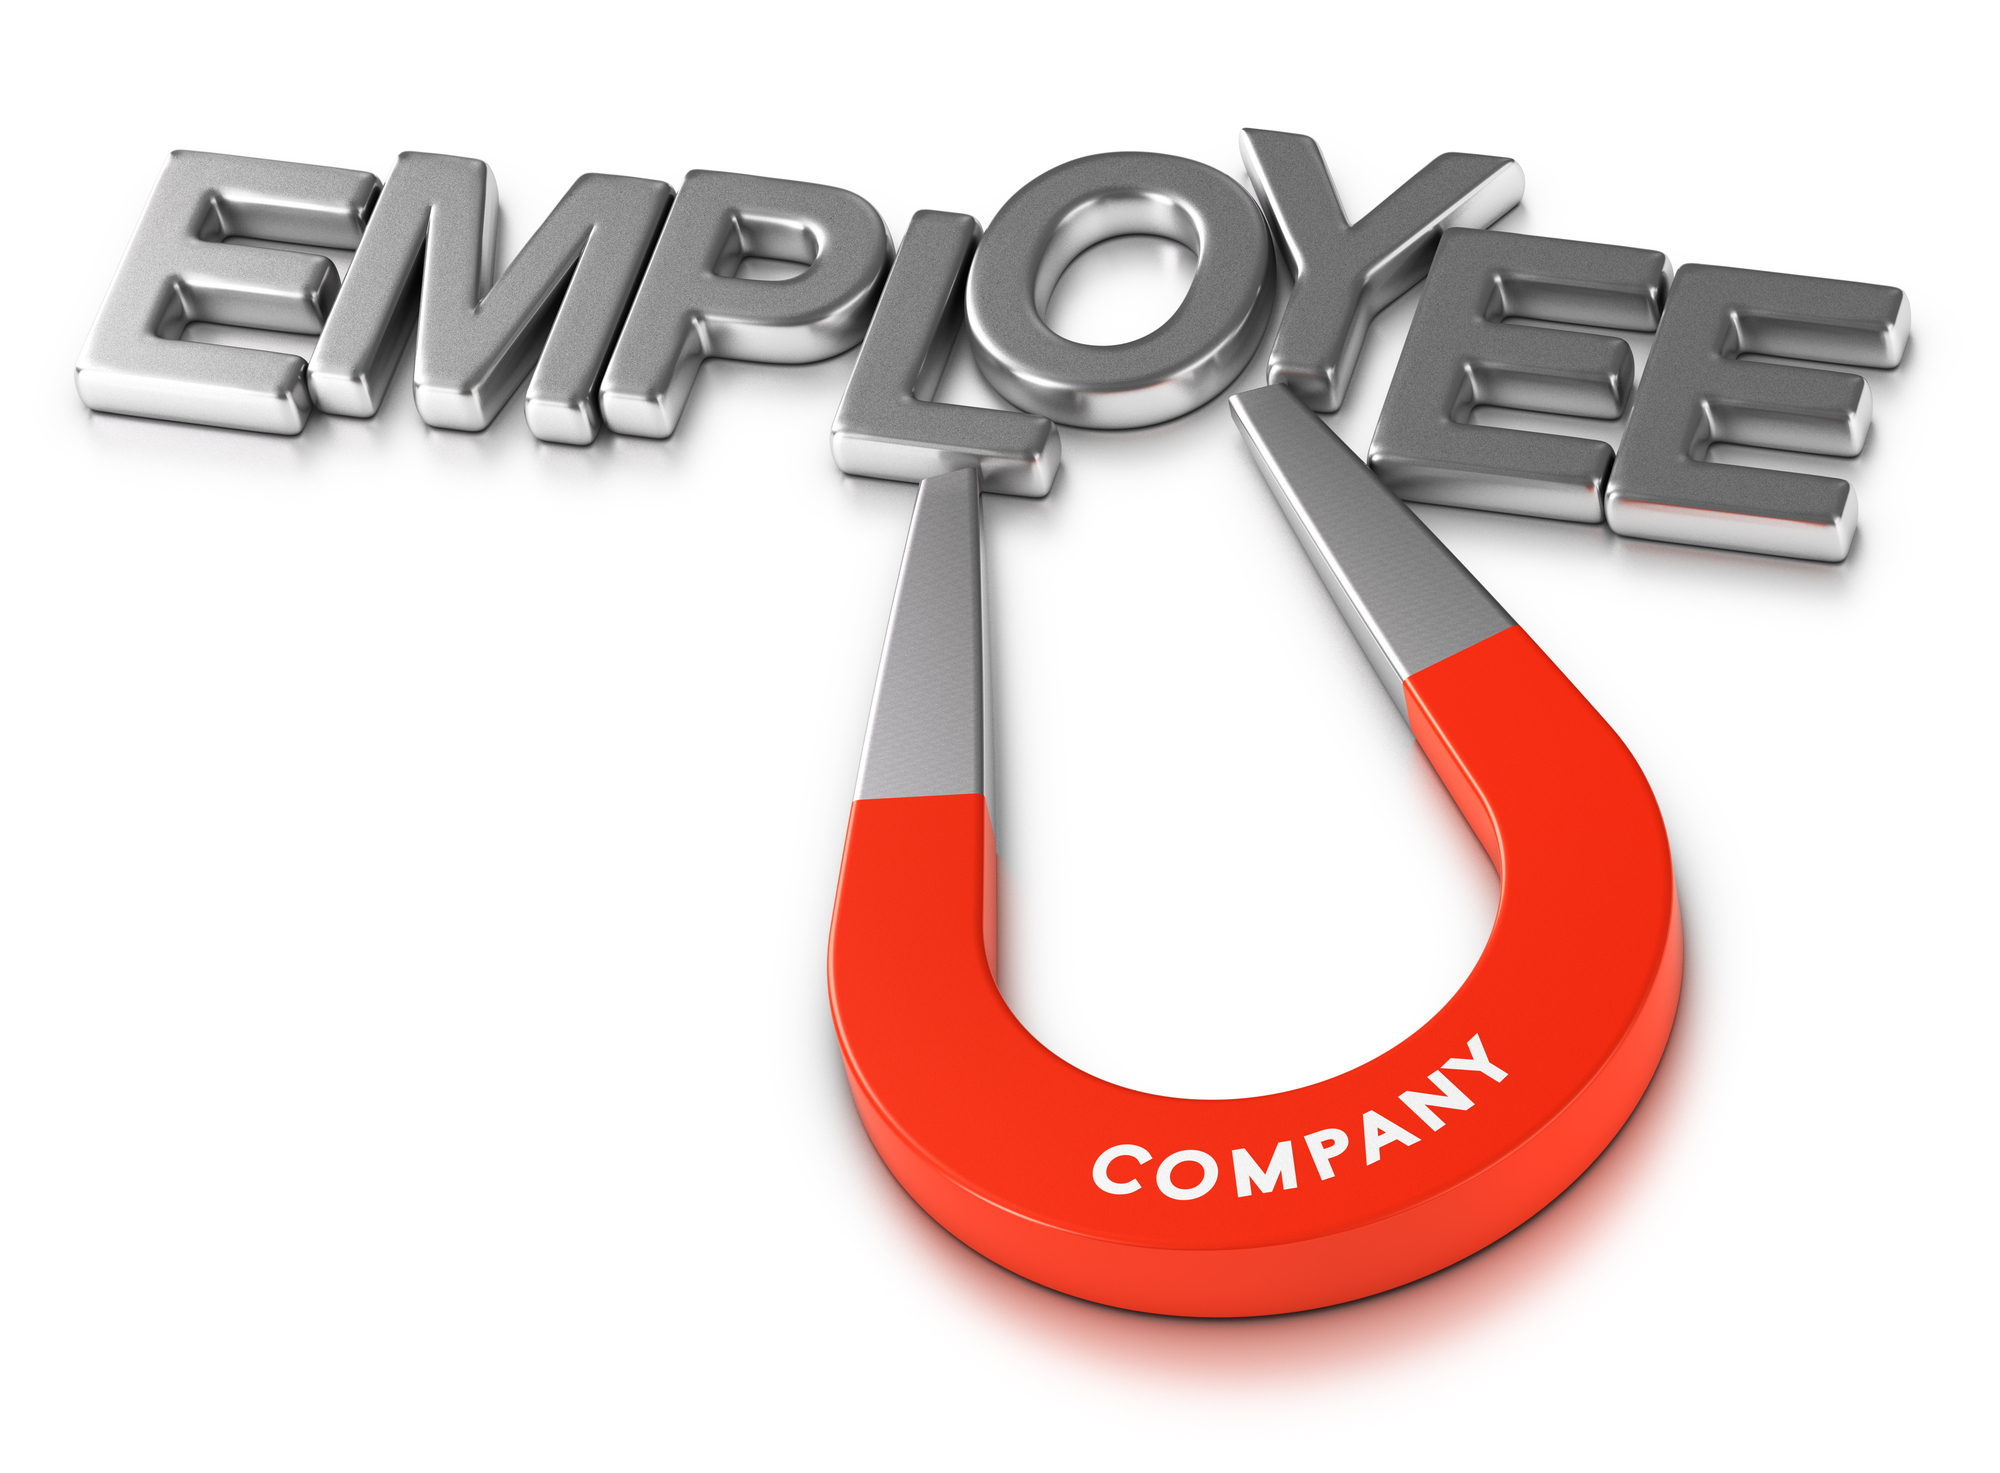 Horseshoe magnet attracting the word employee over white background, 3d illustration of staff retention program or attractive employer.